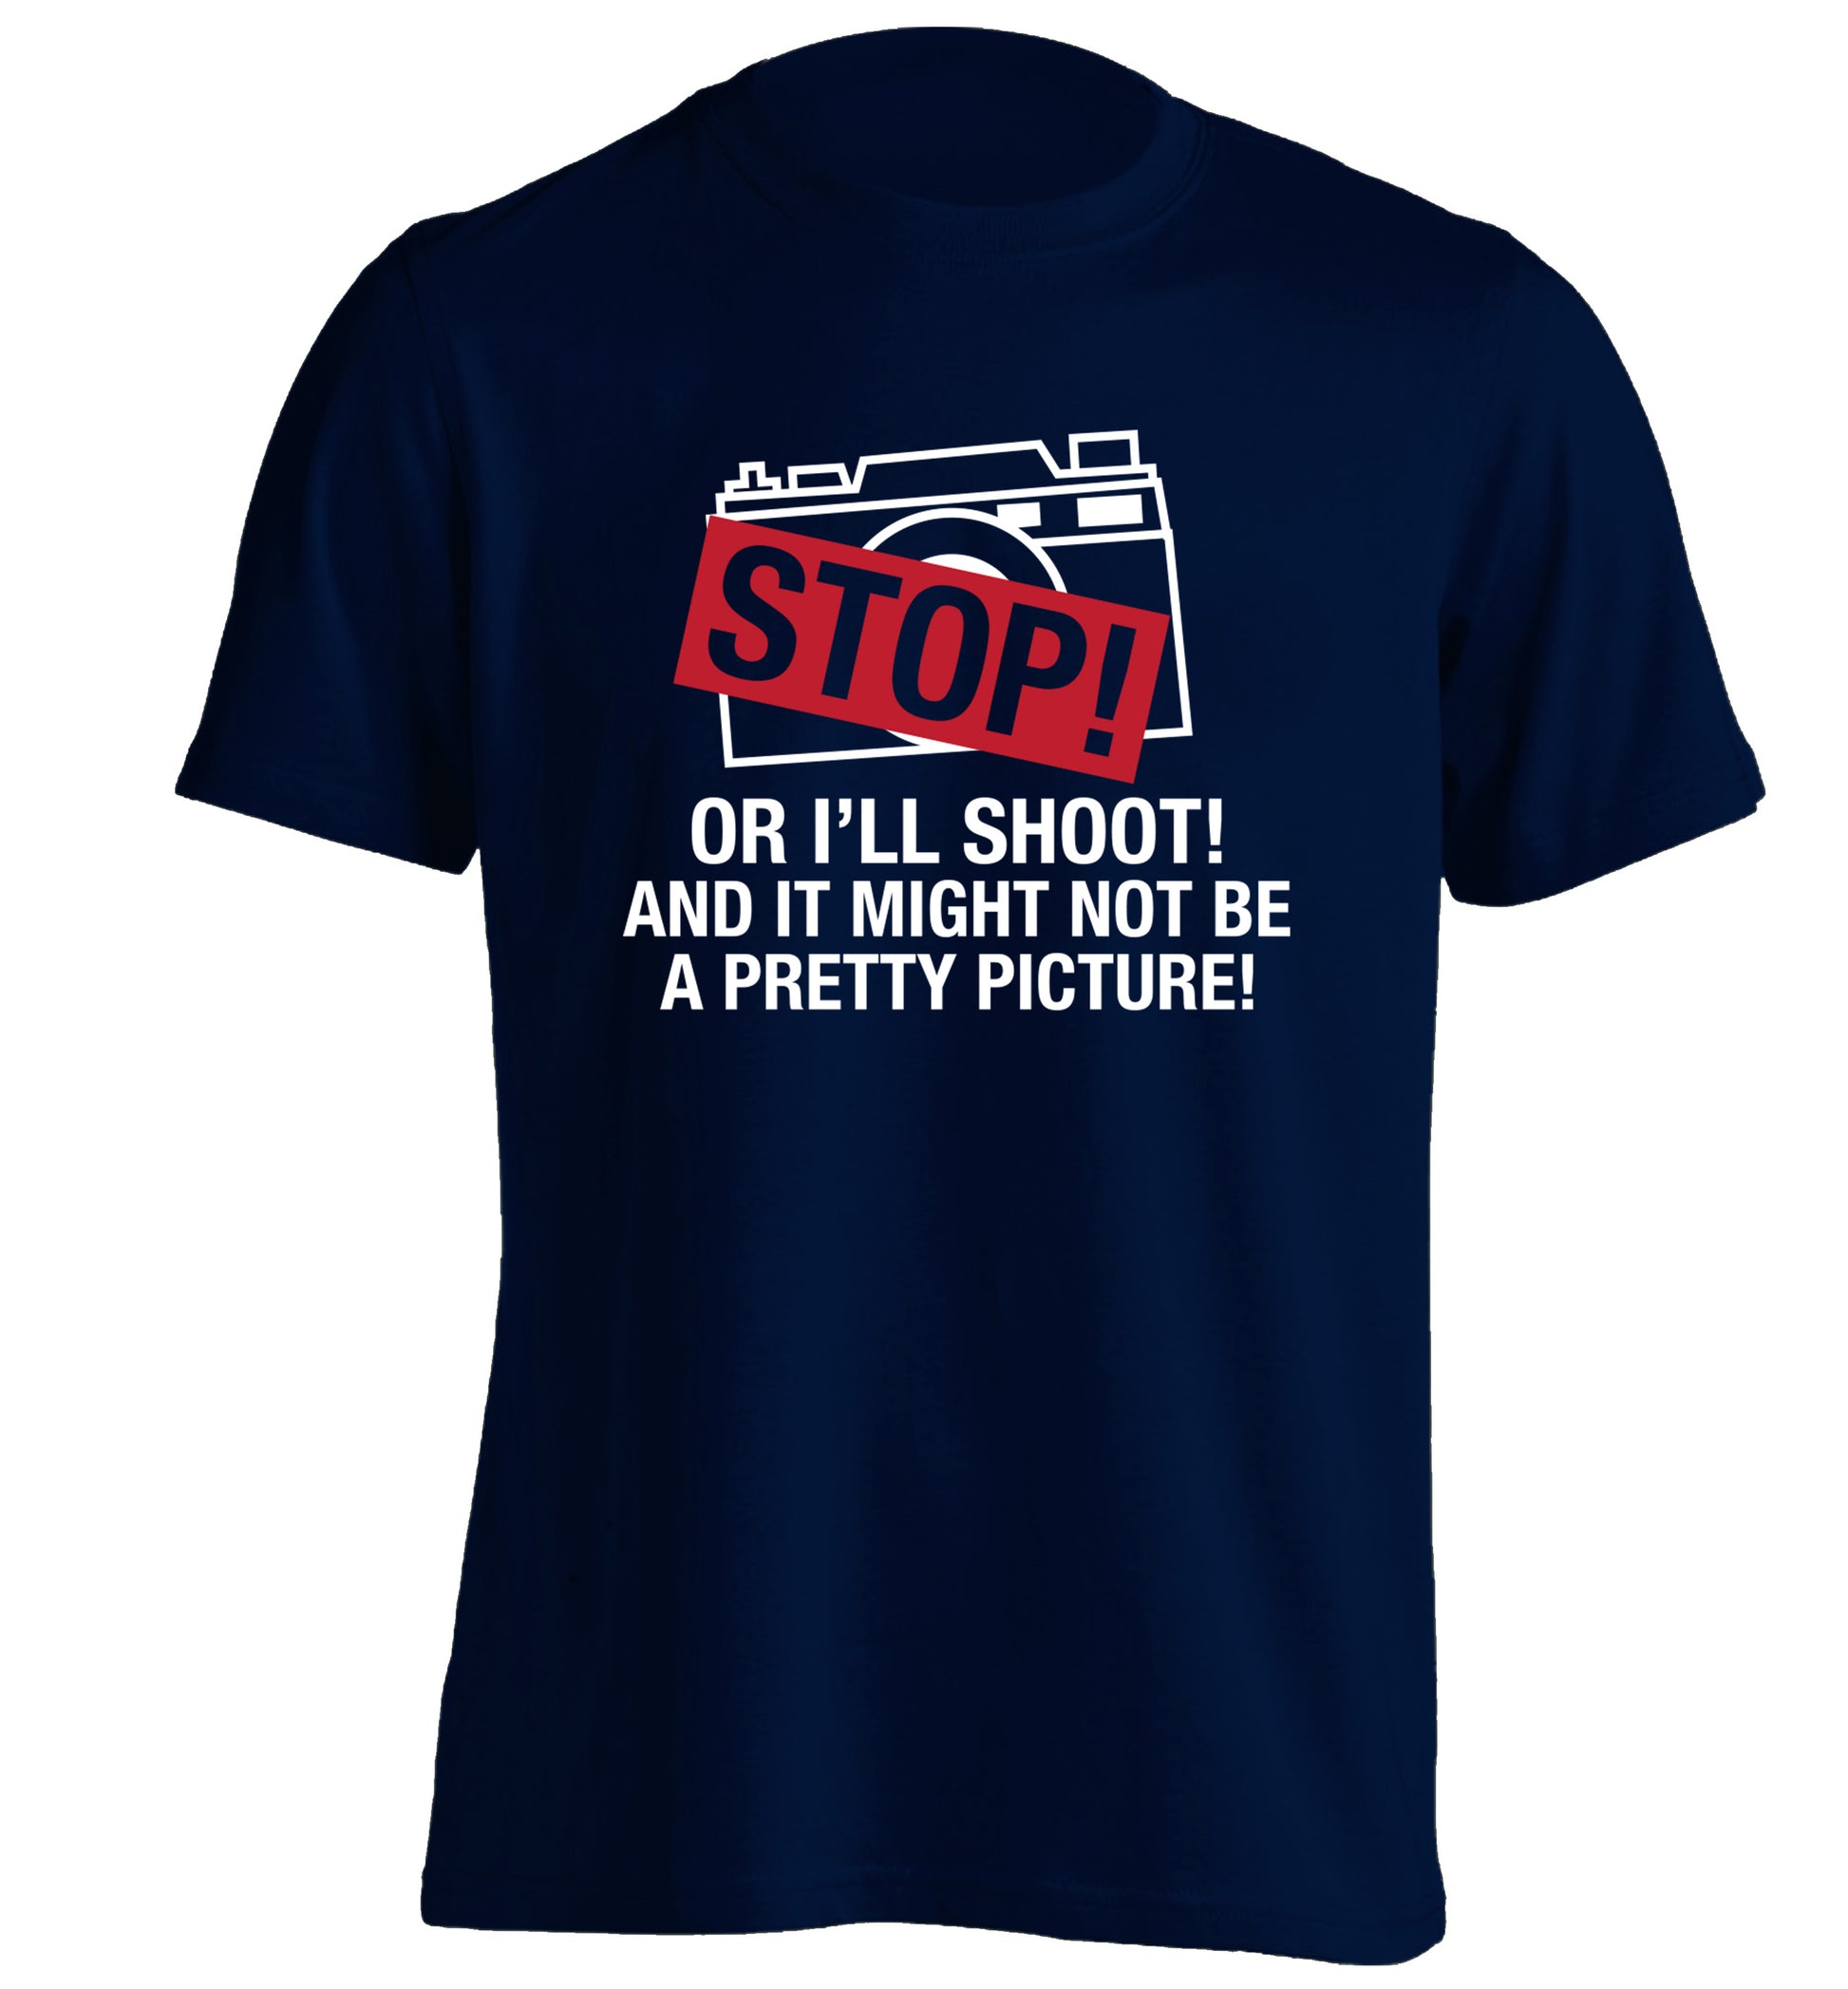 Stop or I'll shoot and it won't be a pretty picture adults unisex navy Tshirt 2XL